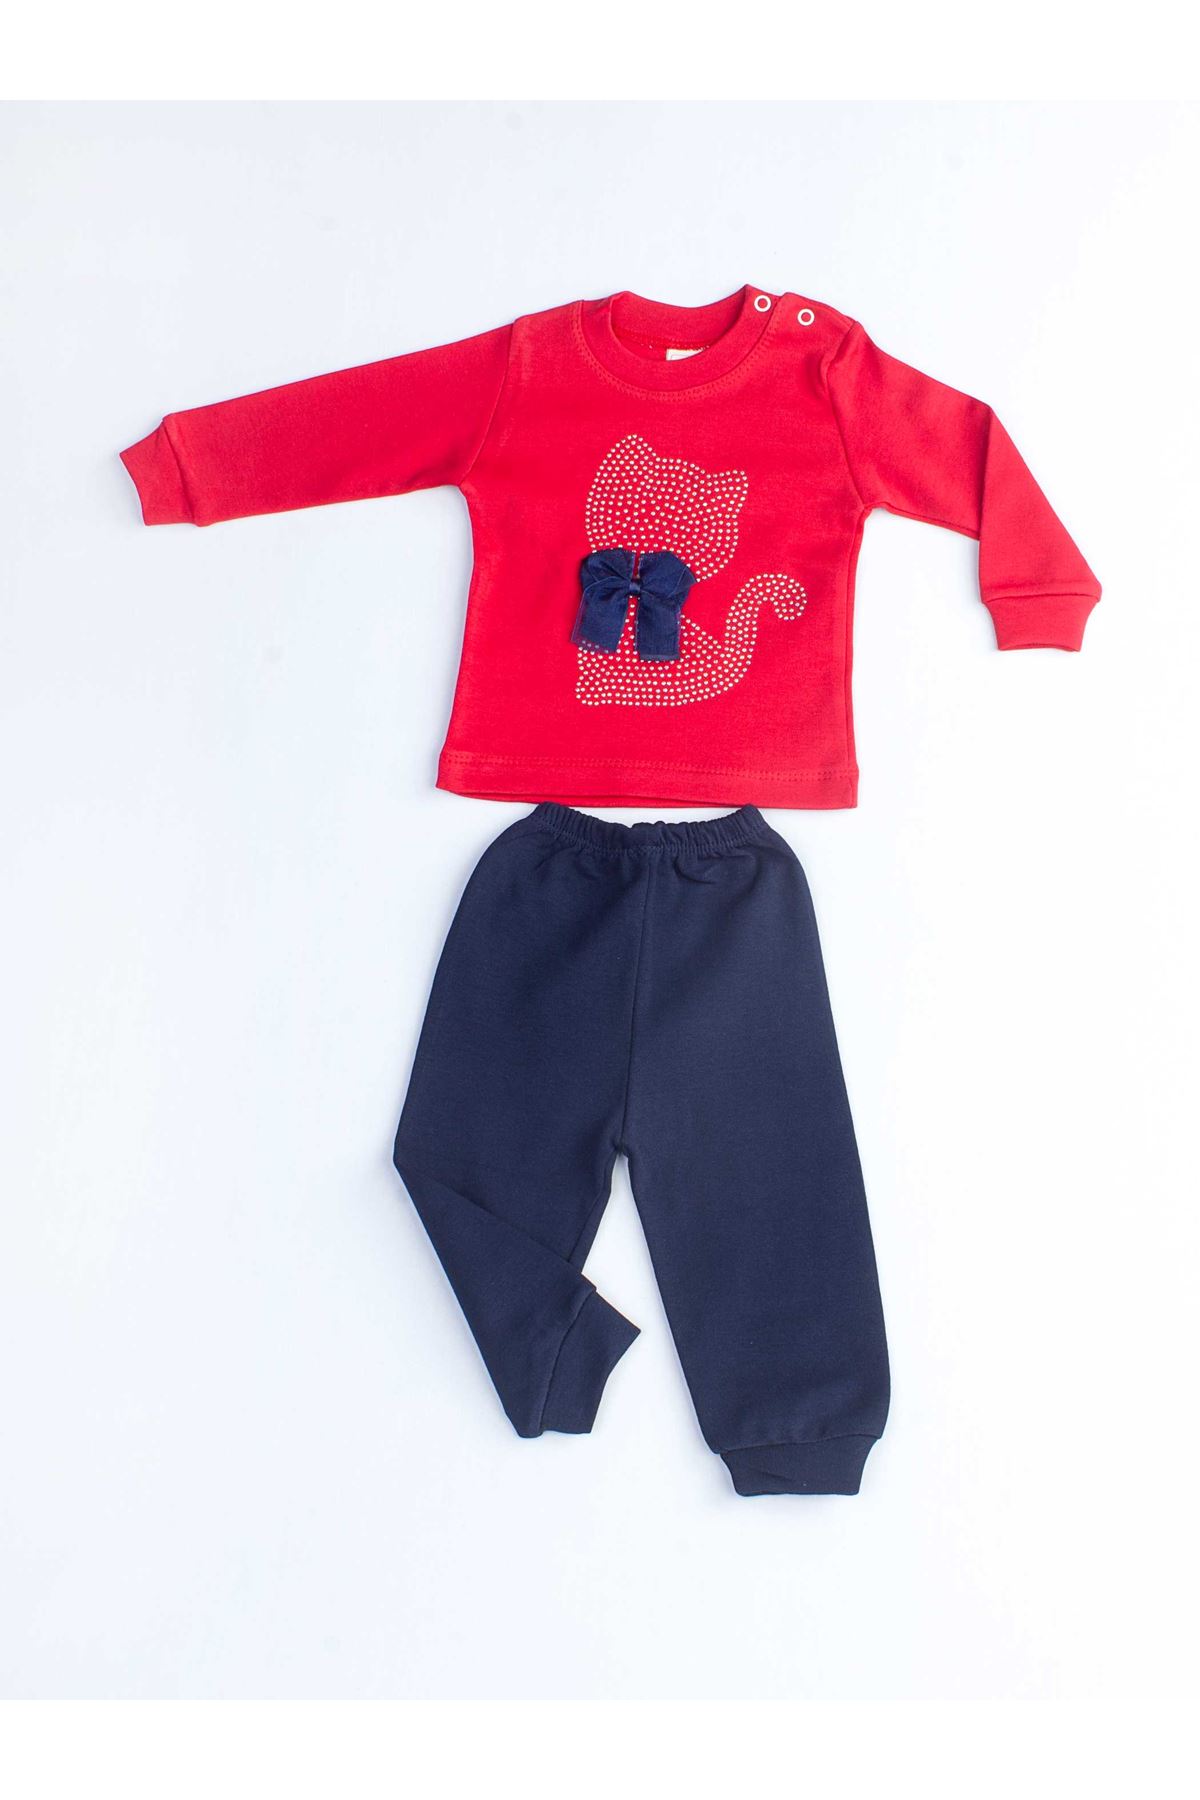 Red Baby Girl Cat Vetch 2 Piece Set Tracksuit Bottom Wear Top Outfit Cotton Casual Casual Outfit Models